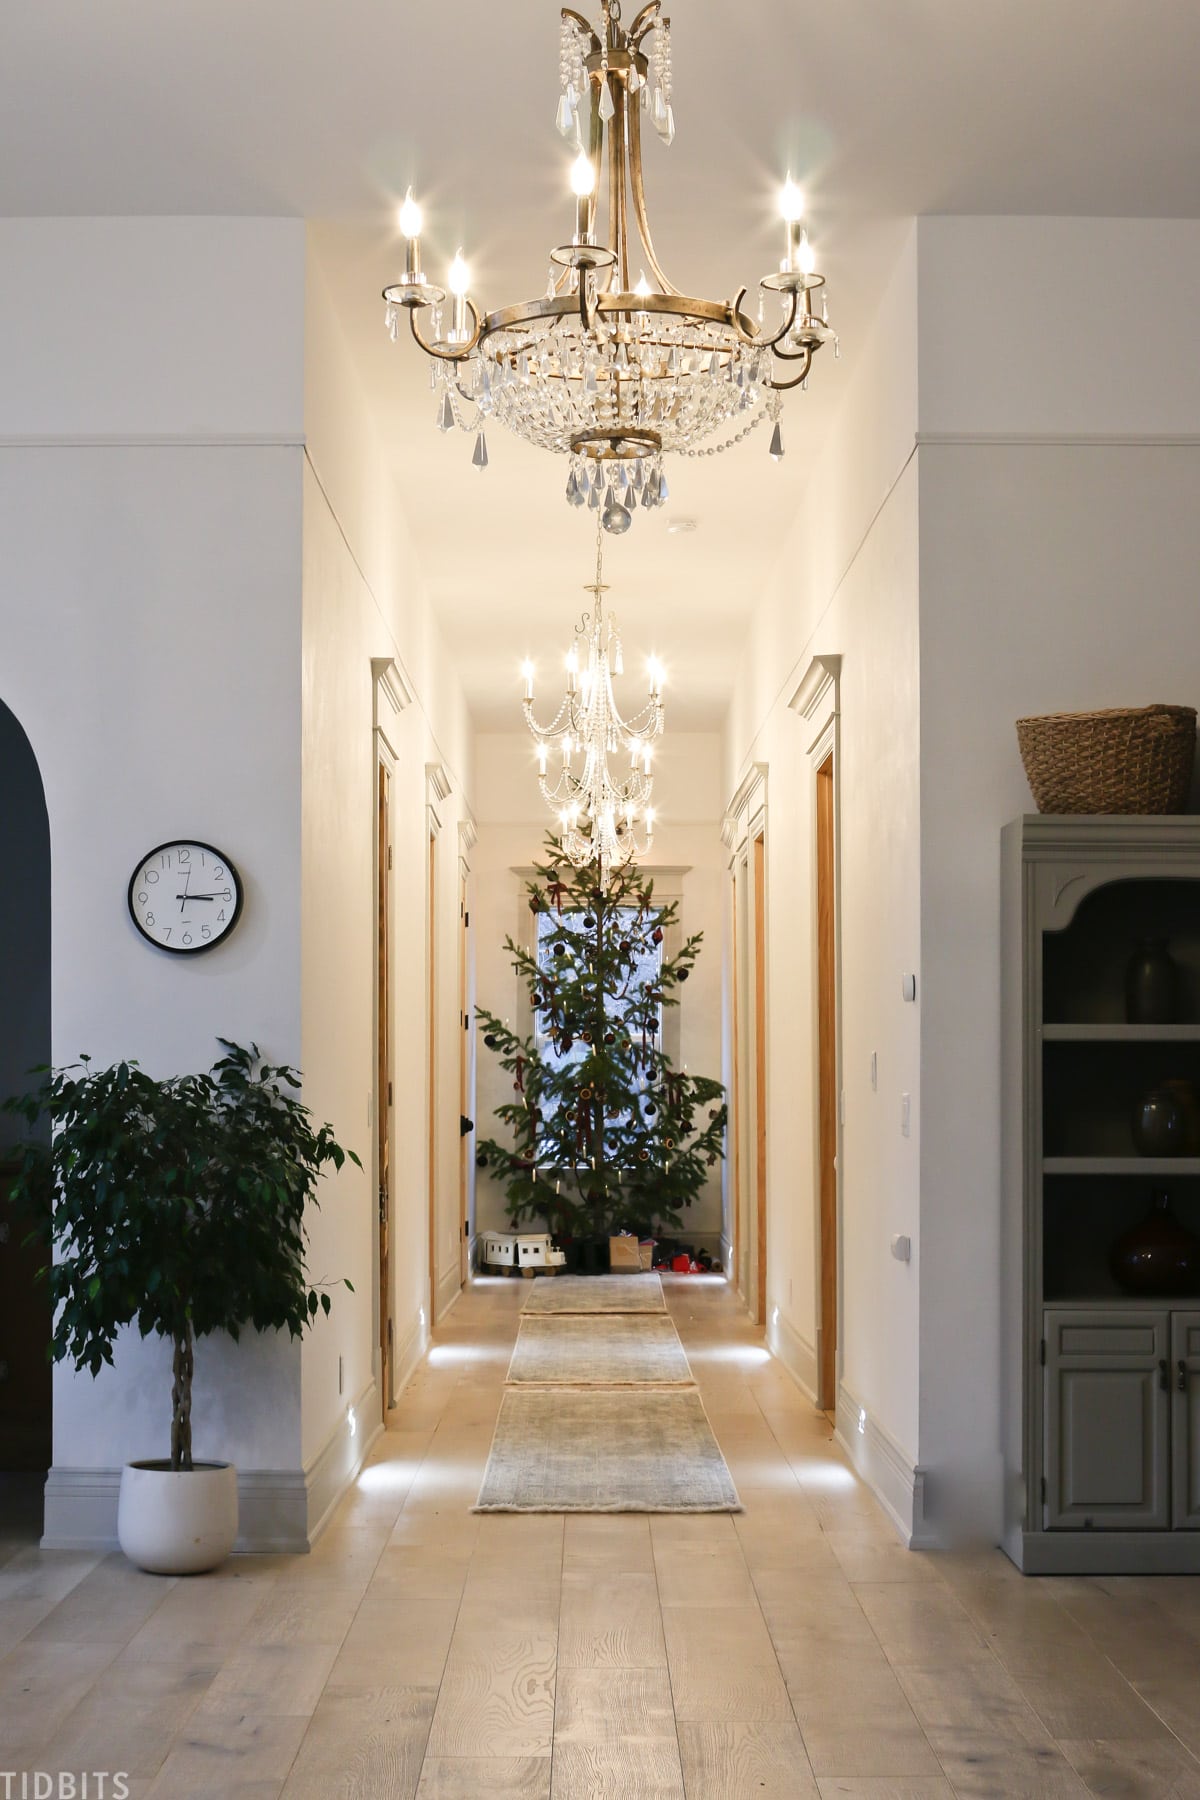 Old fashioned Christmas tree placed at the end of a hallway with two chandeliers hanging from the ceiling